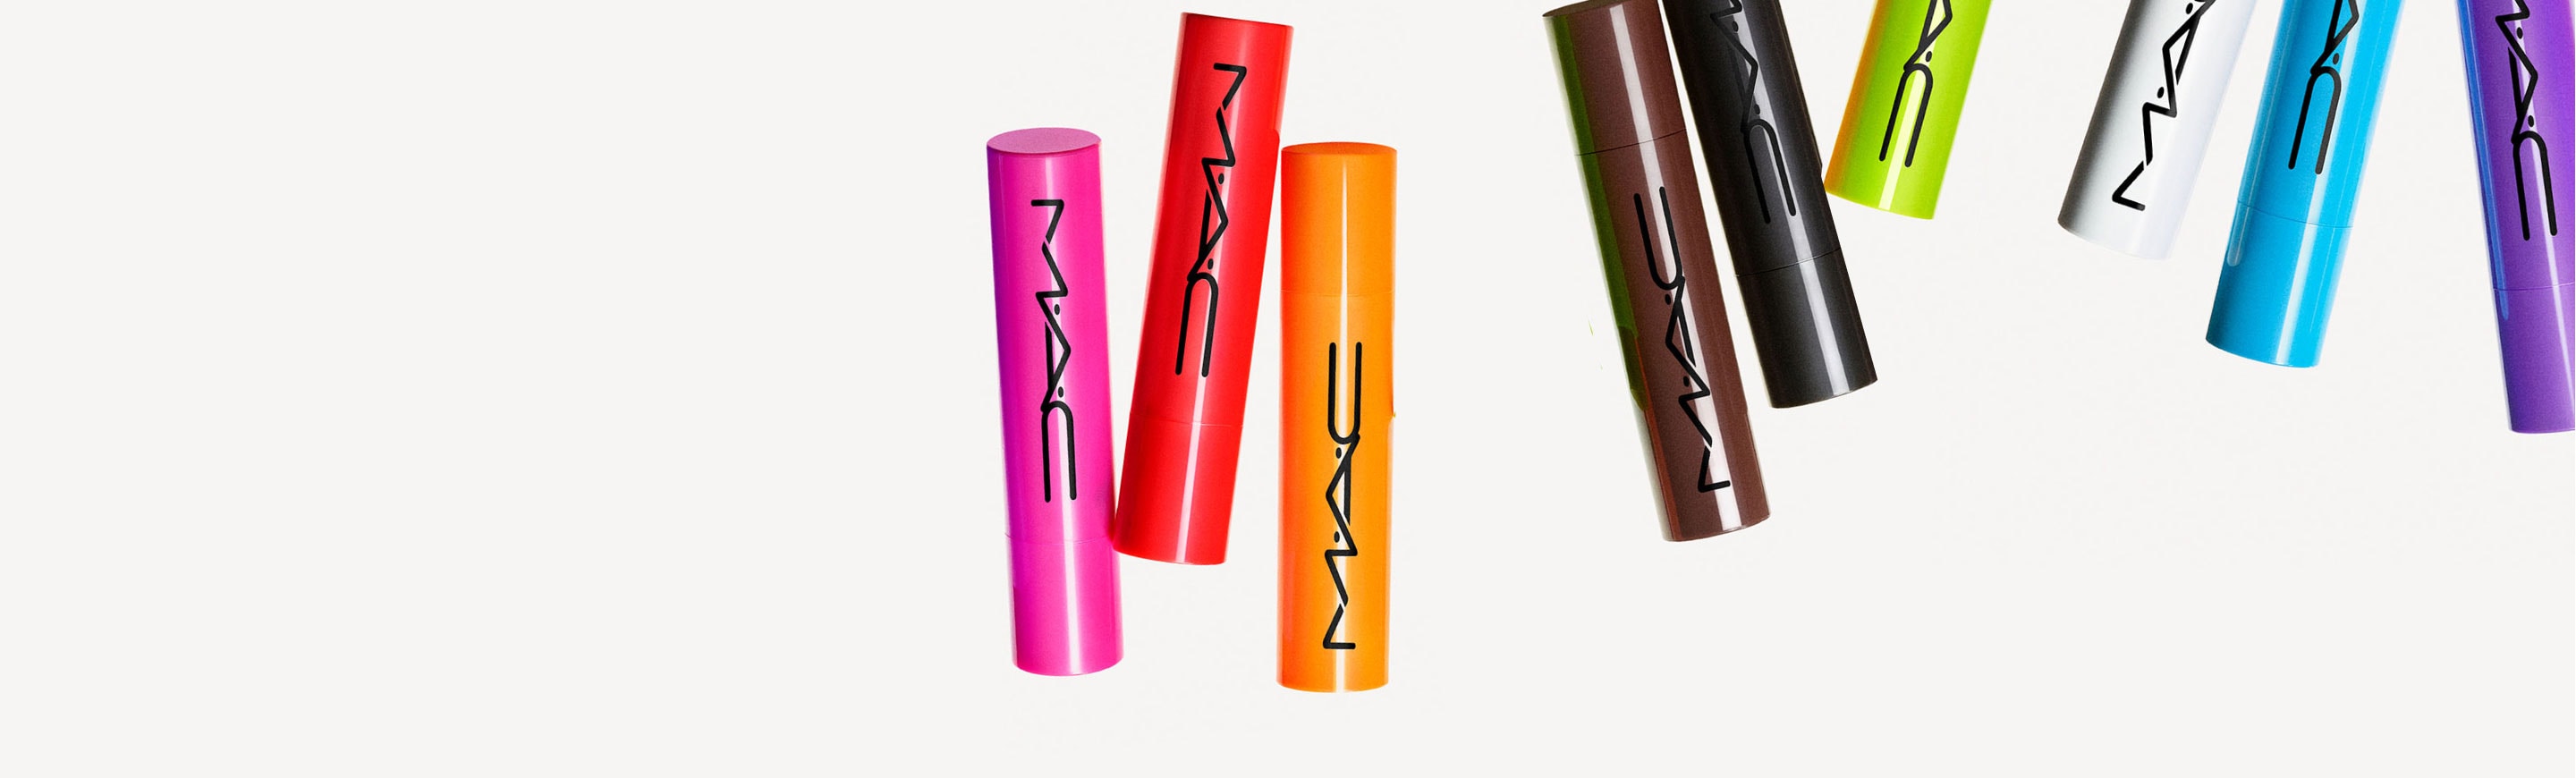 Squirt Plumping Gloss Stick Mac Cosmetics Official Site